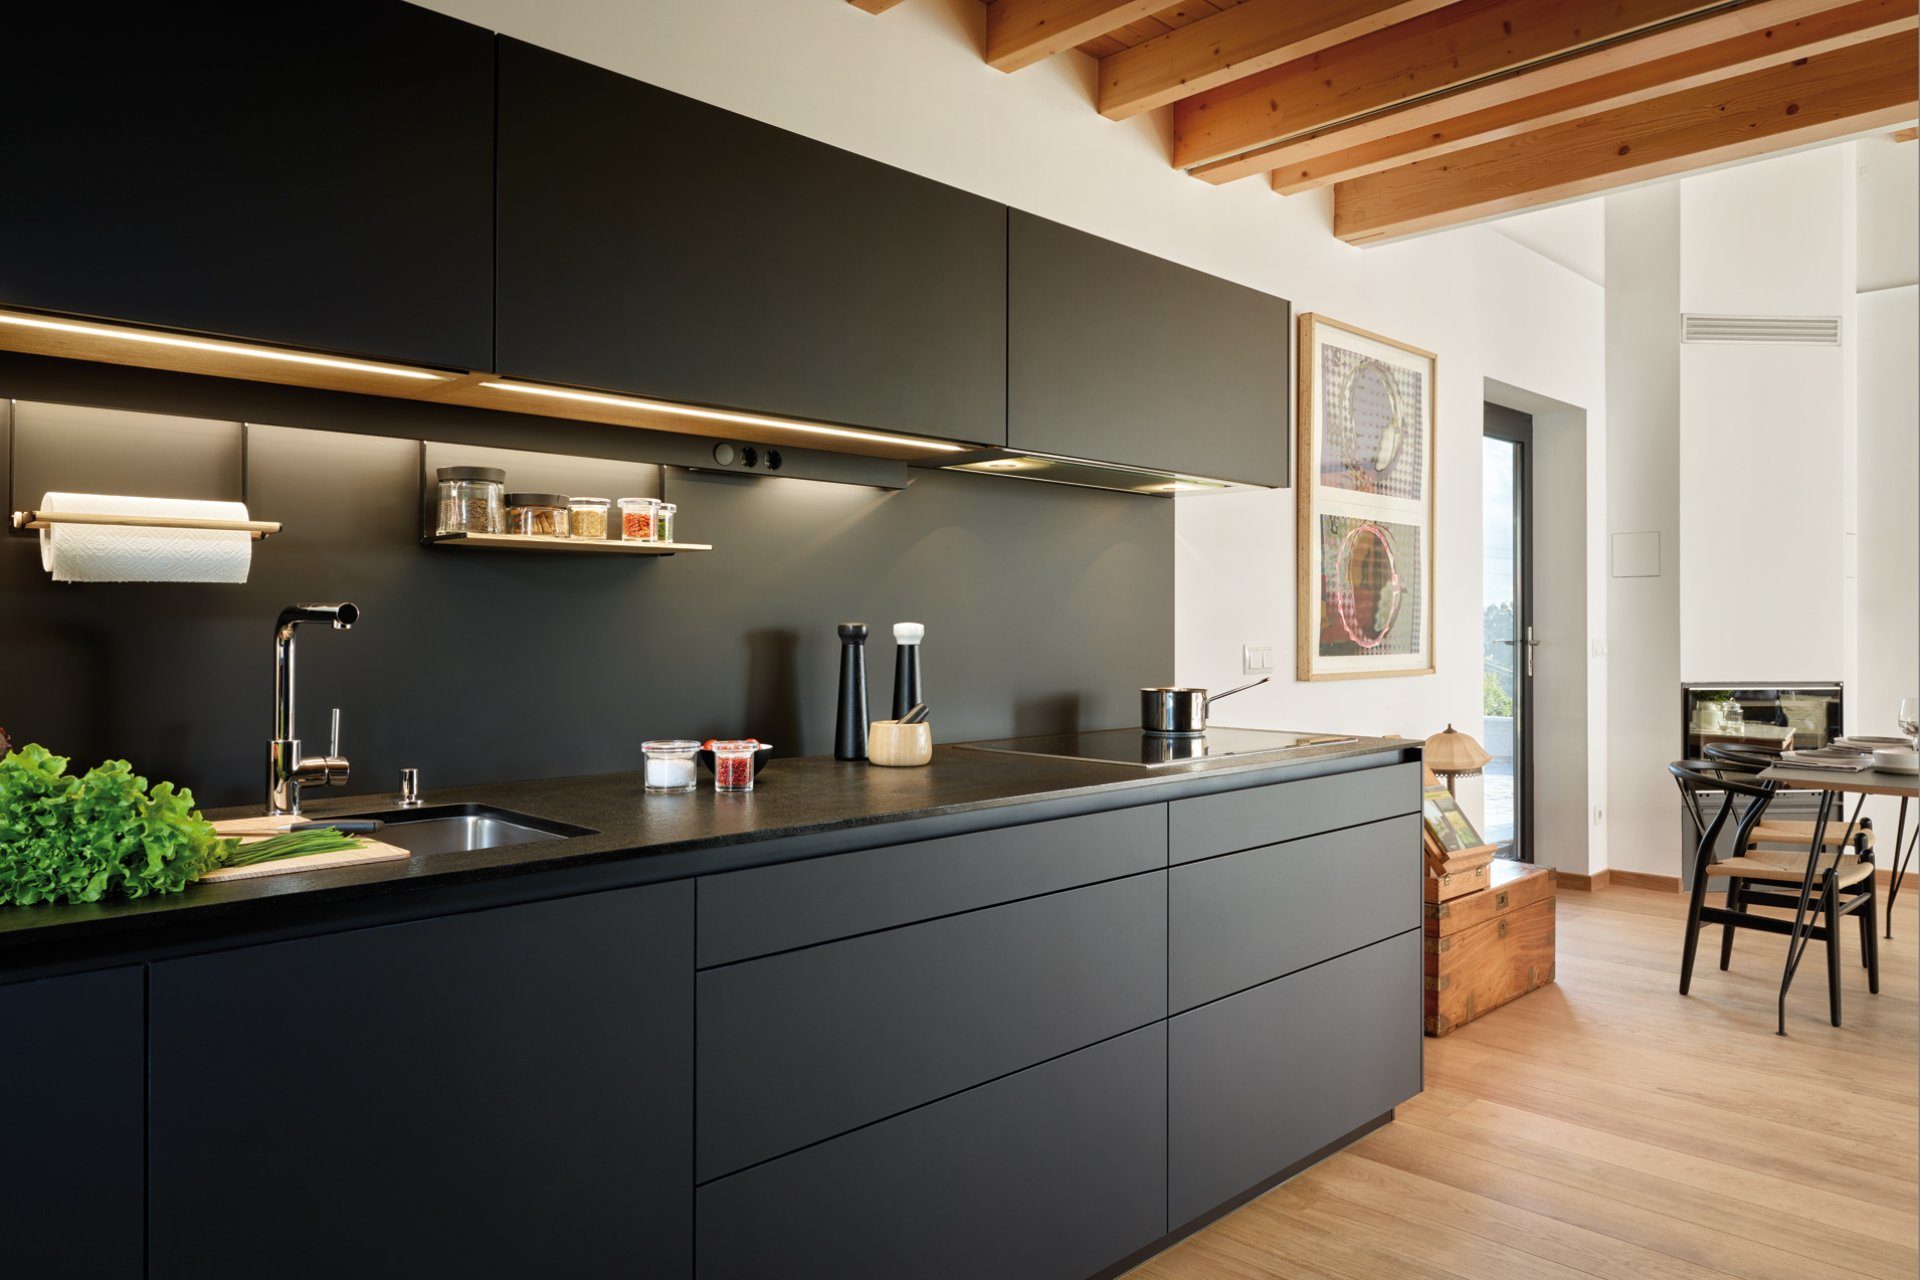 Image of kitchen composed of a worktop and black furniture with clean lines and smooth fronts